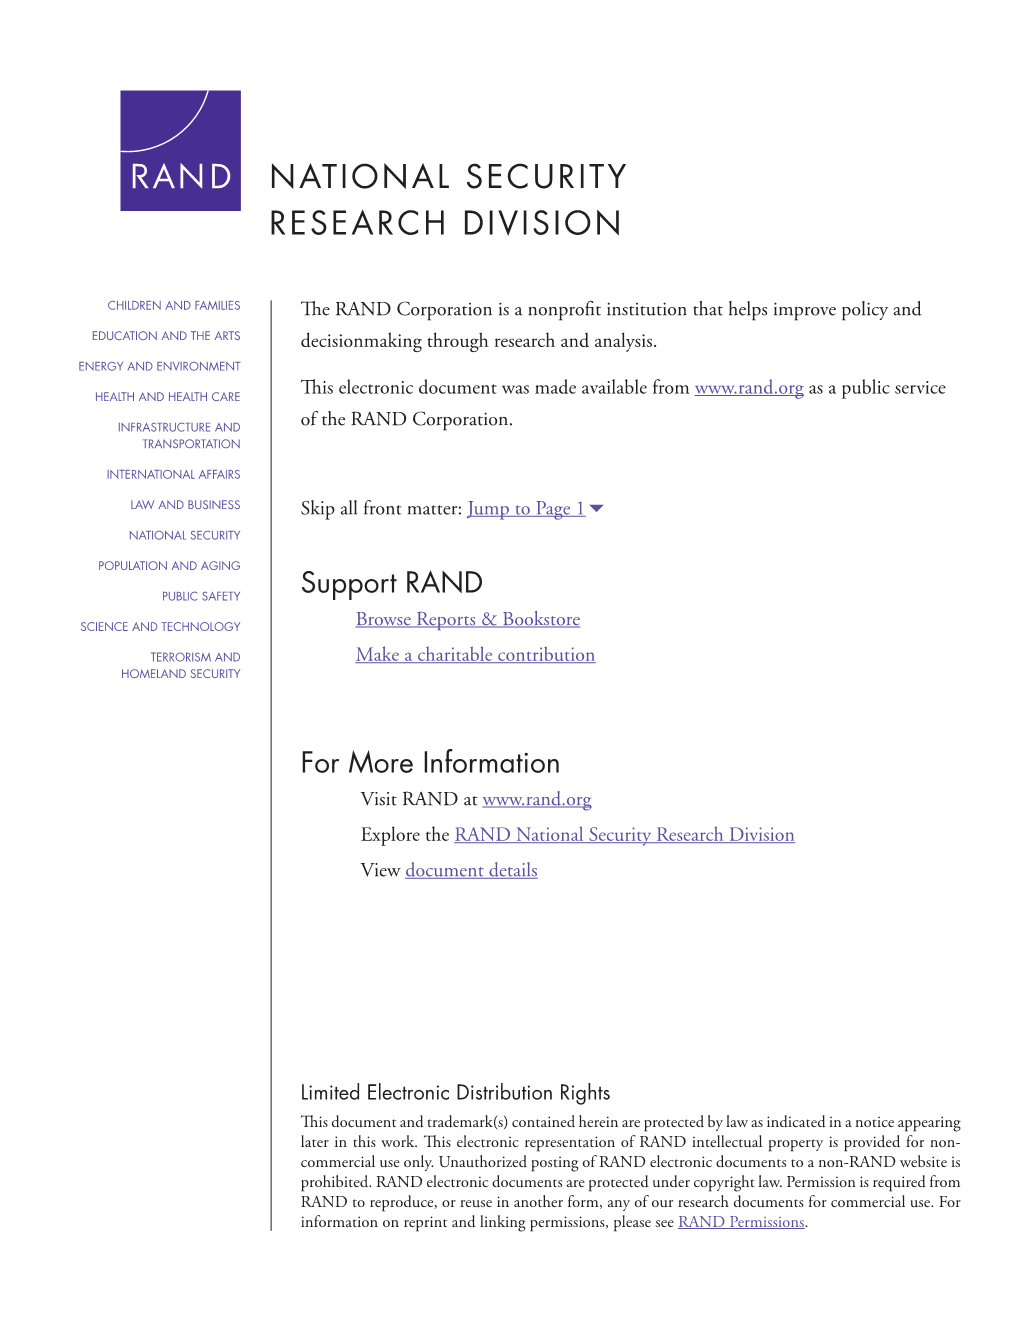 RAND NSRD Annual Report 2011-2012